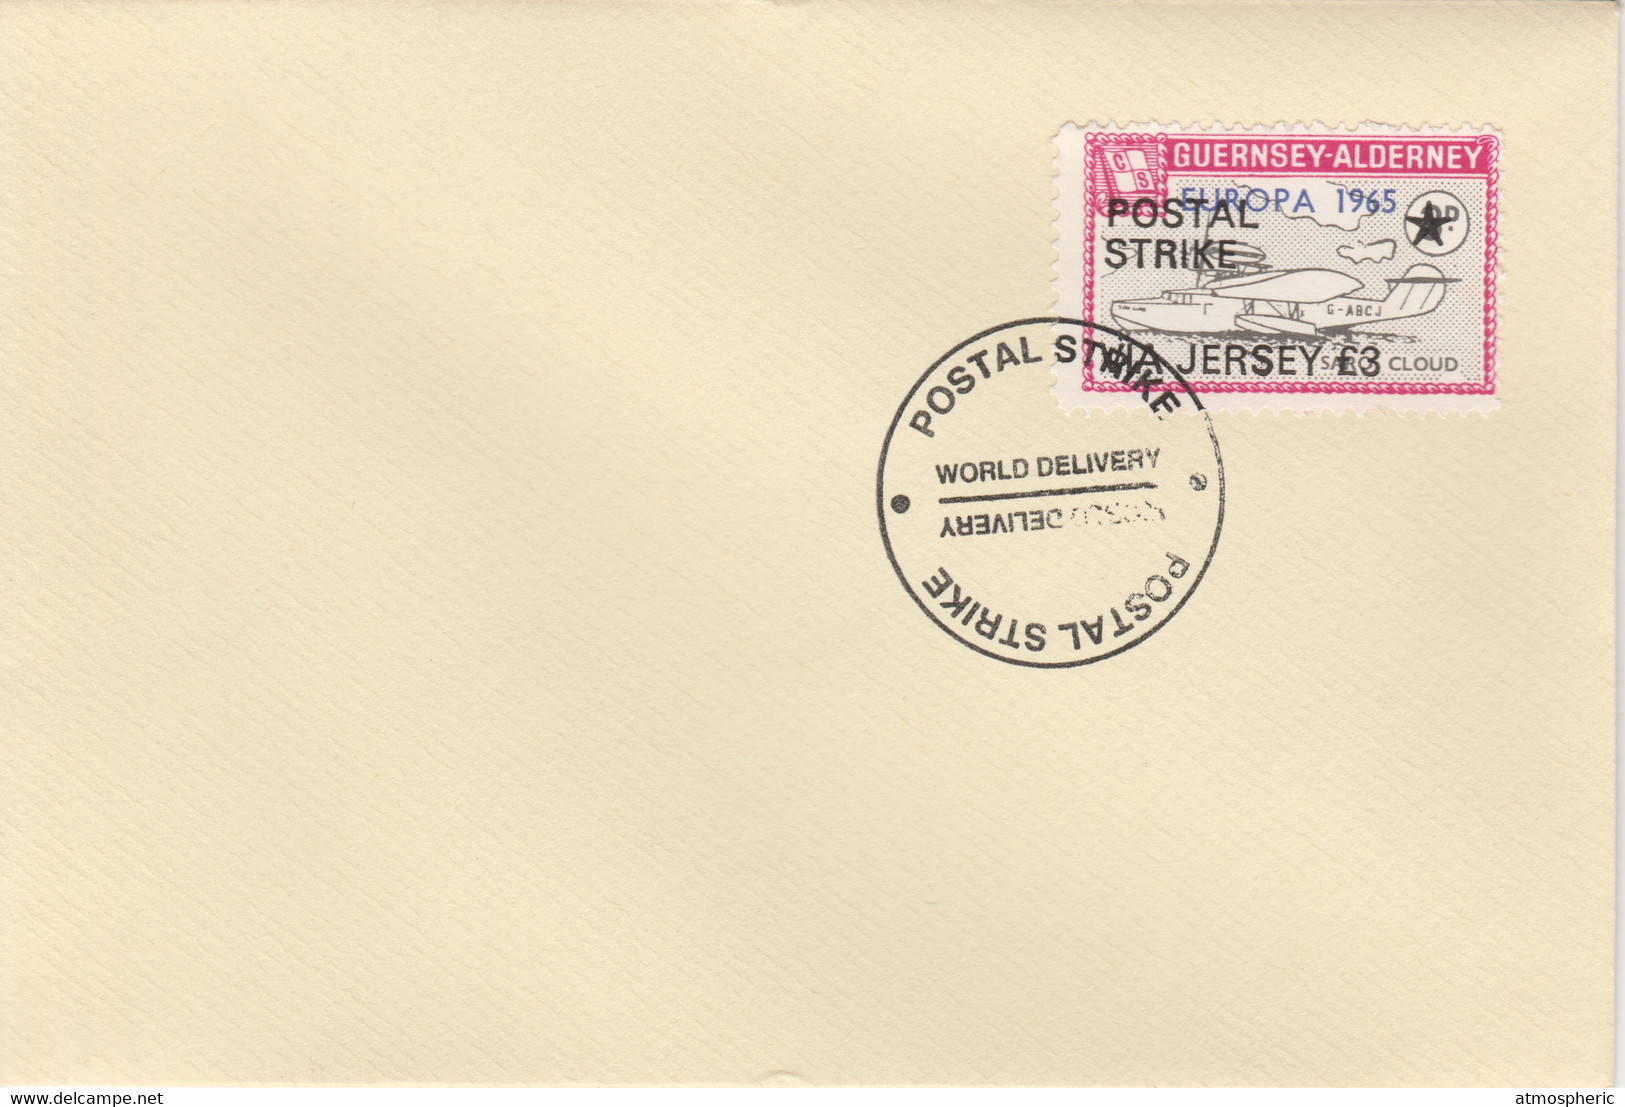 Guernsey - Alderney 1971 Postal Strike Cover To Jersey Bearing Flying Boat Saro Cloud 3d Overprinted Europa 1965 - Non Classificati